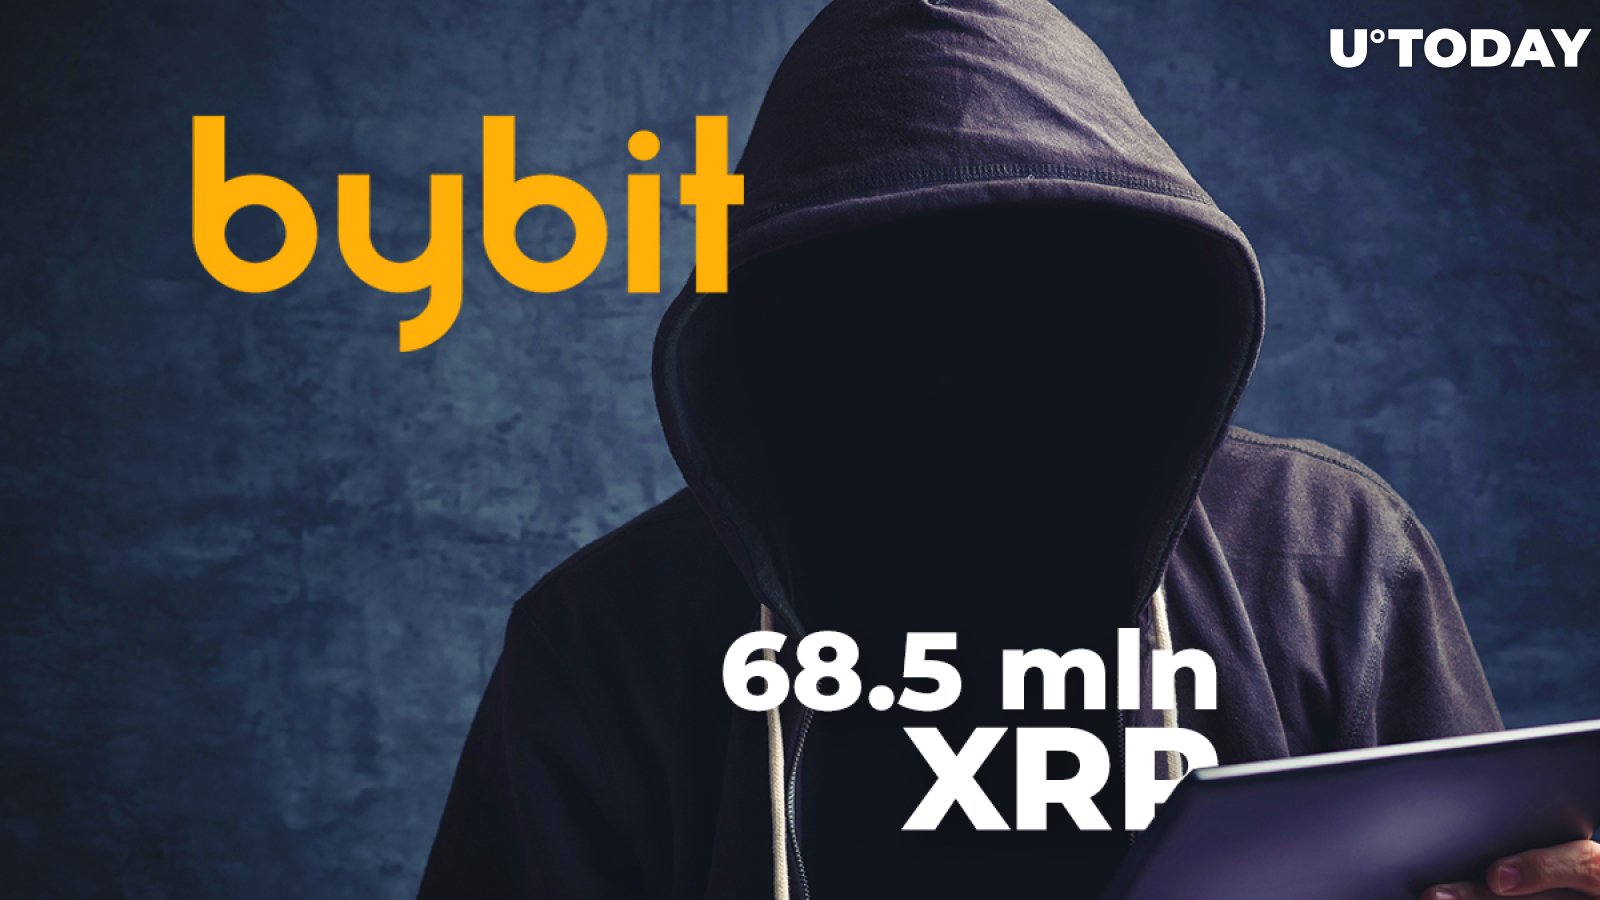 Nearly 68.5 Mln XRP Transferred to Bybit From Anonymous Wallet With Major Exchange Behind It